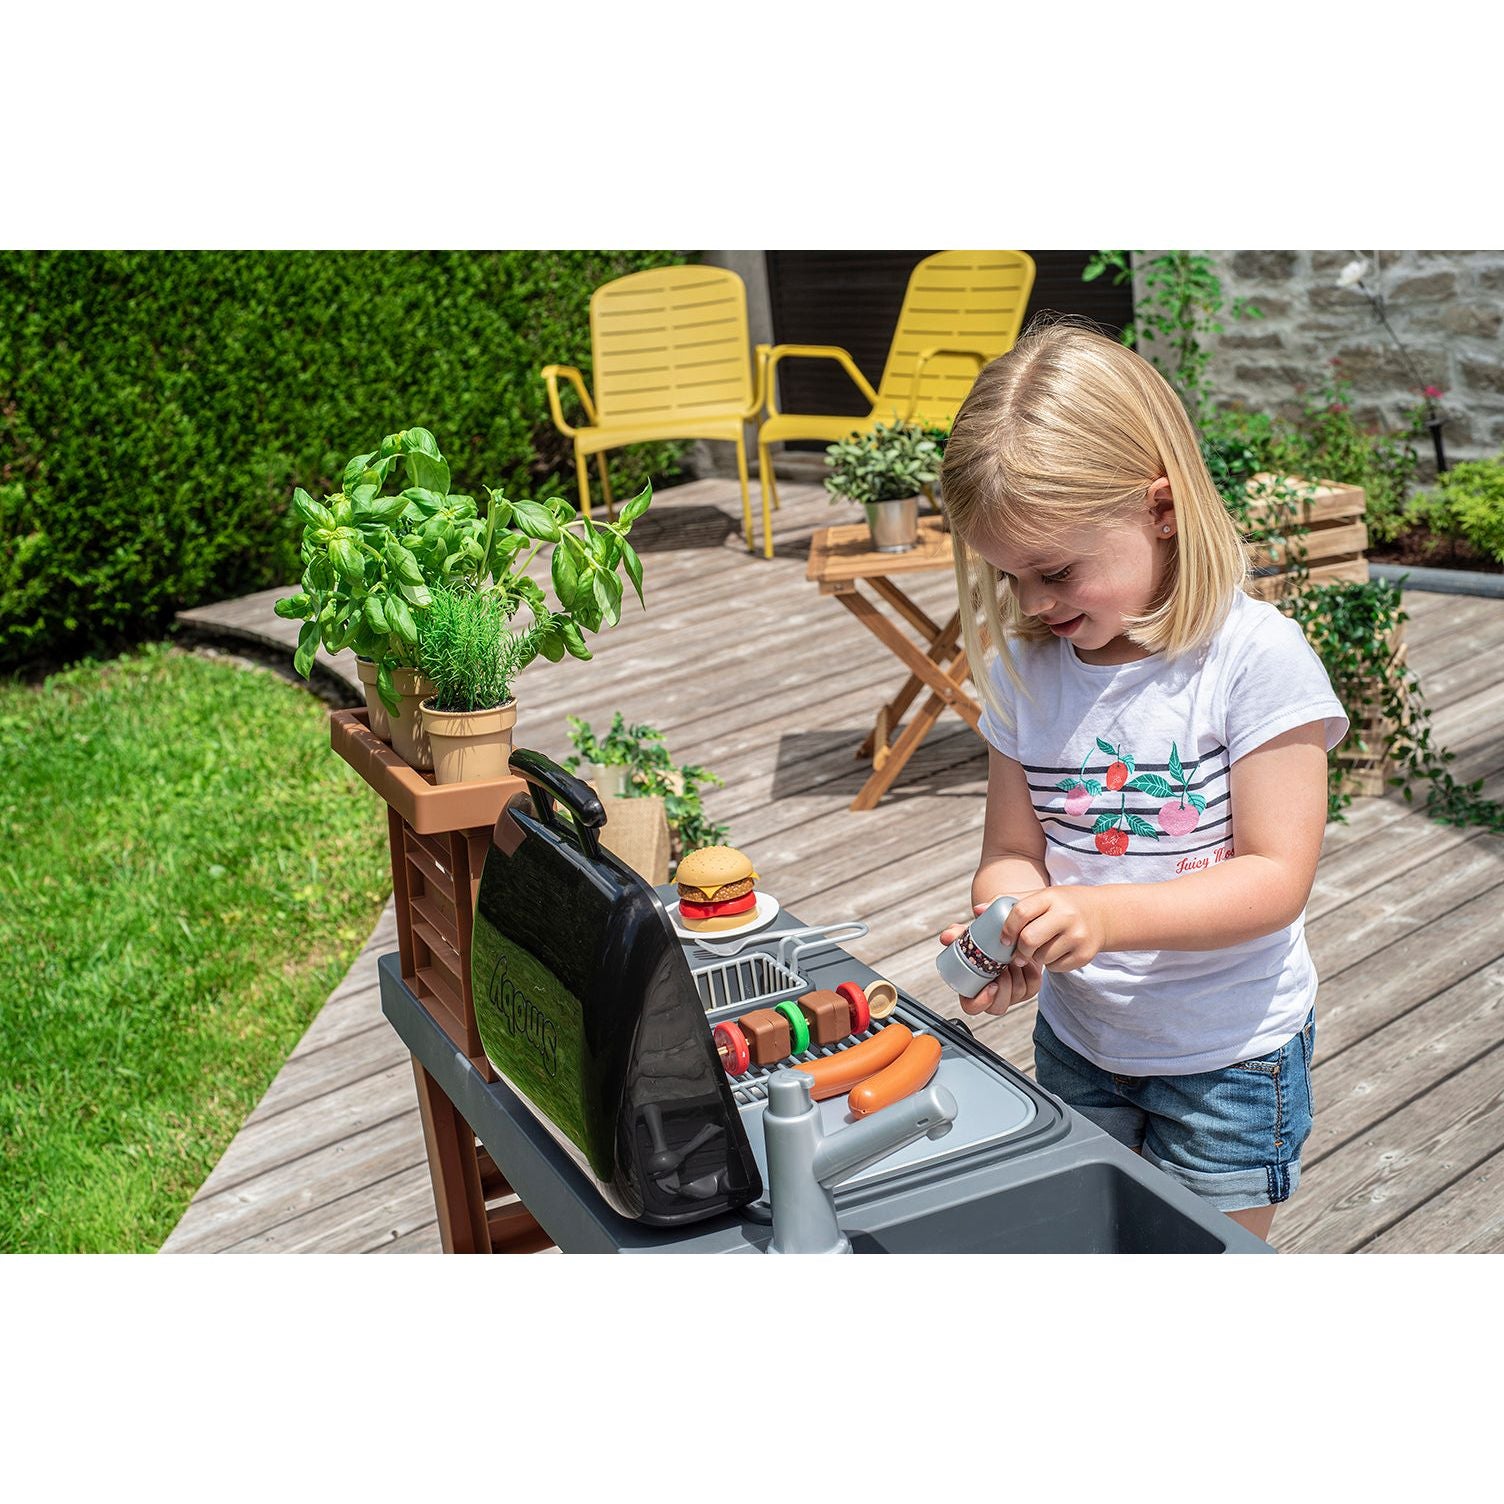 girl cooking on Smoby Garden Kitchen BBQ Set 